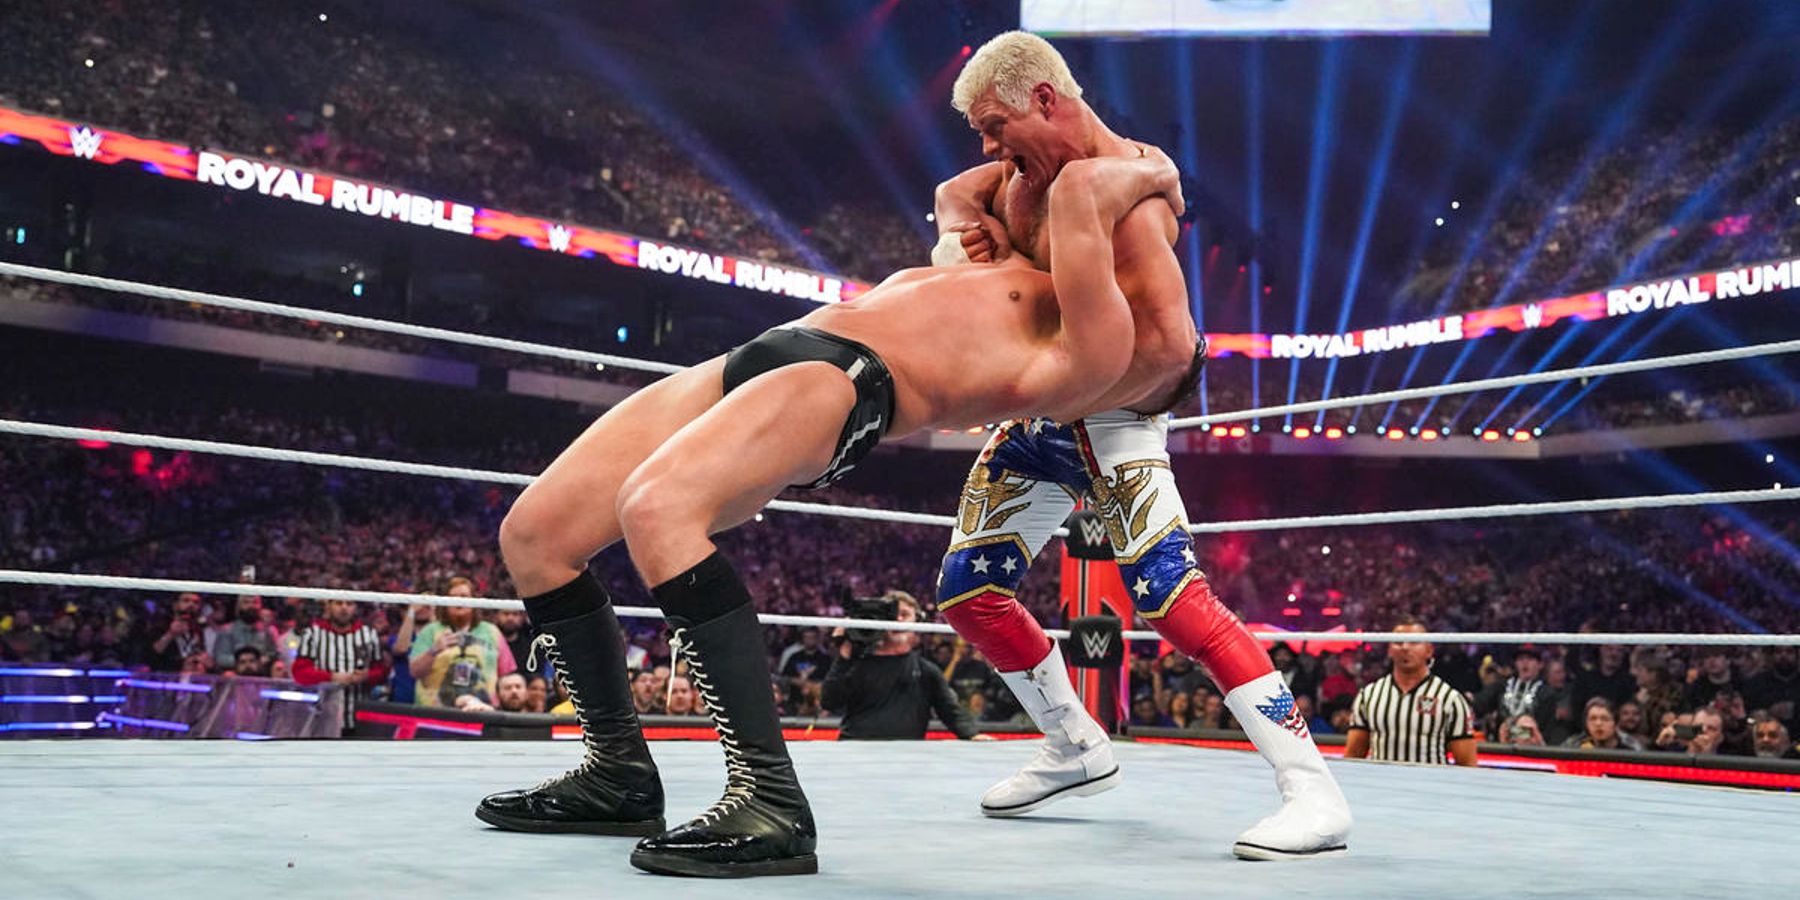 Cody Rhodes prepares to hit Gunther with his Cross Rhodes finisher during the finish of the men's Royal Rumble match in 2023.